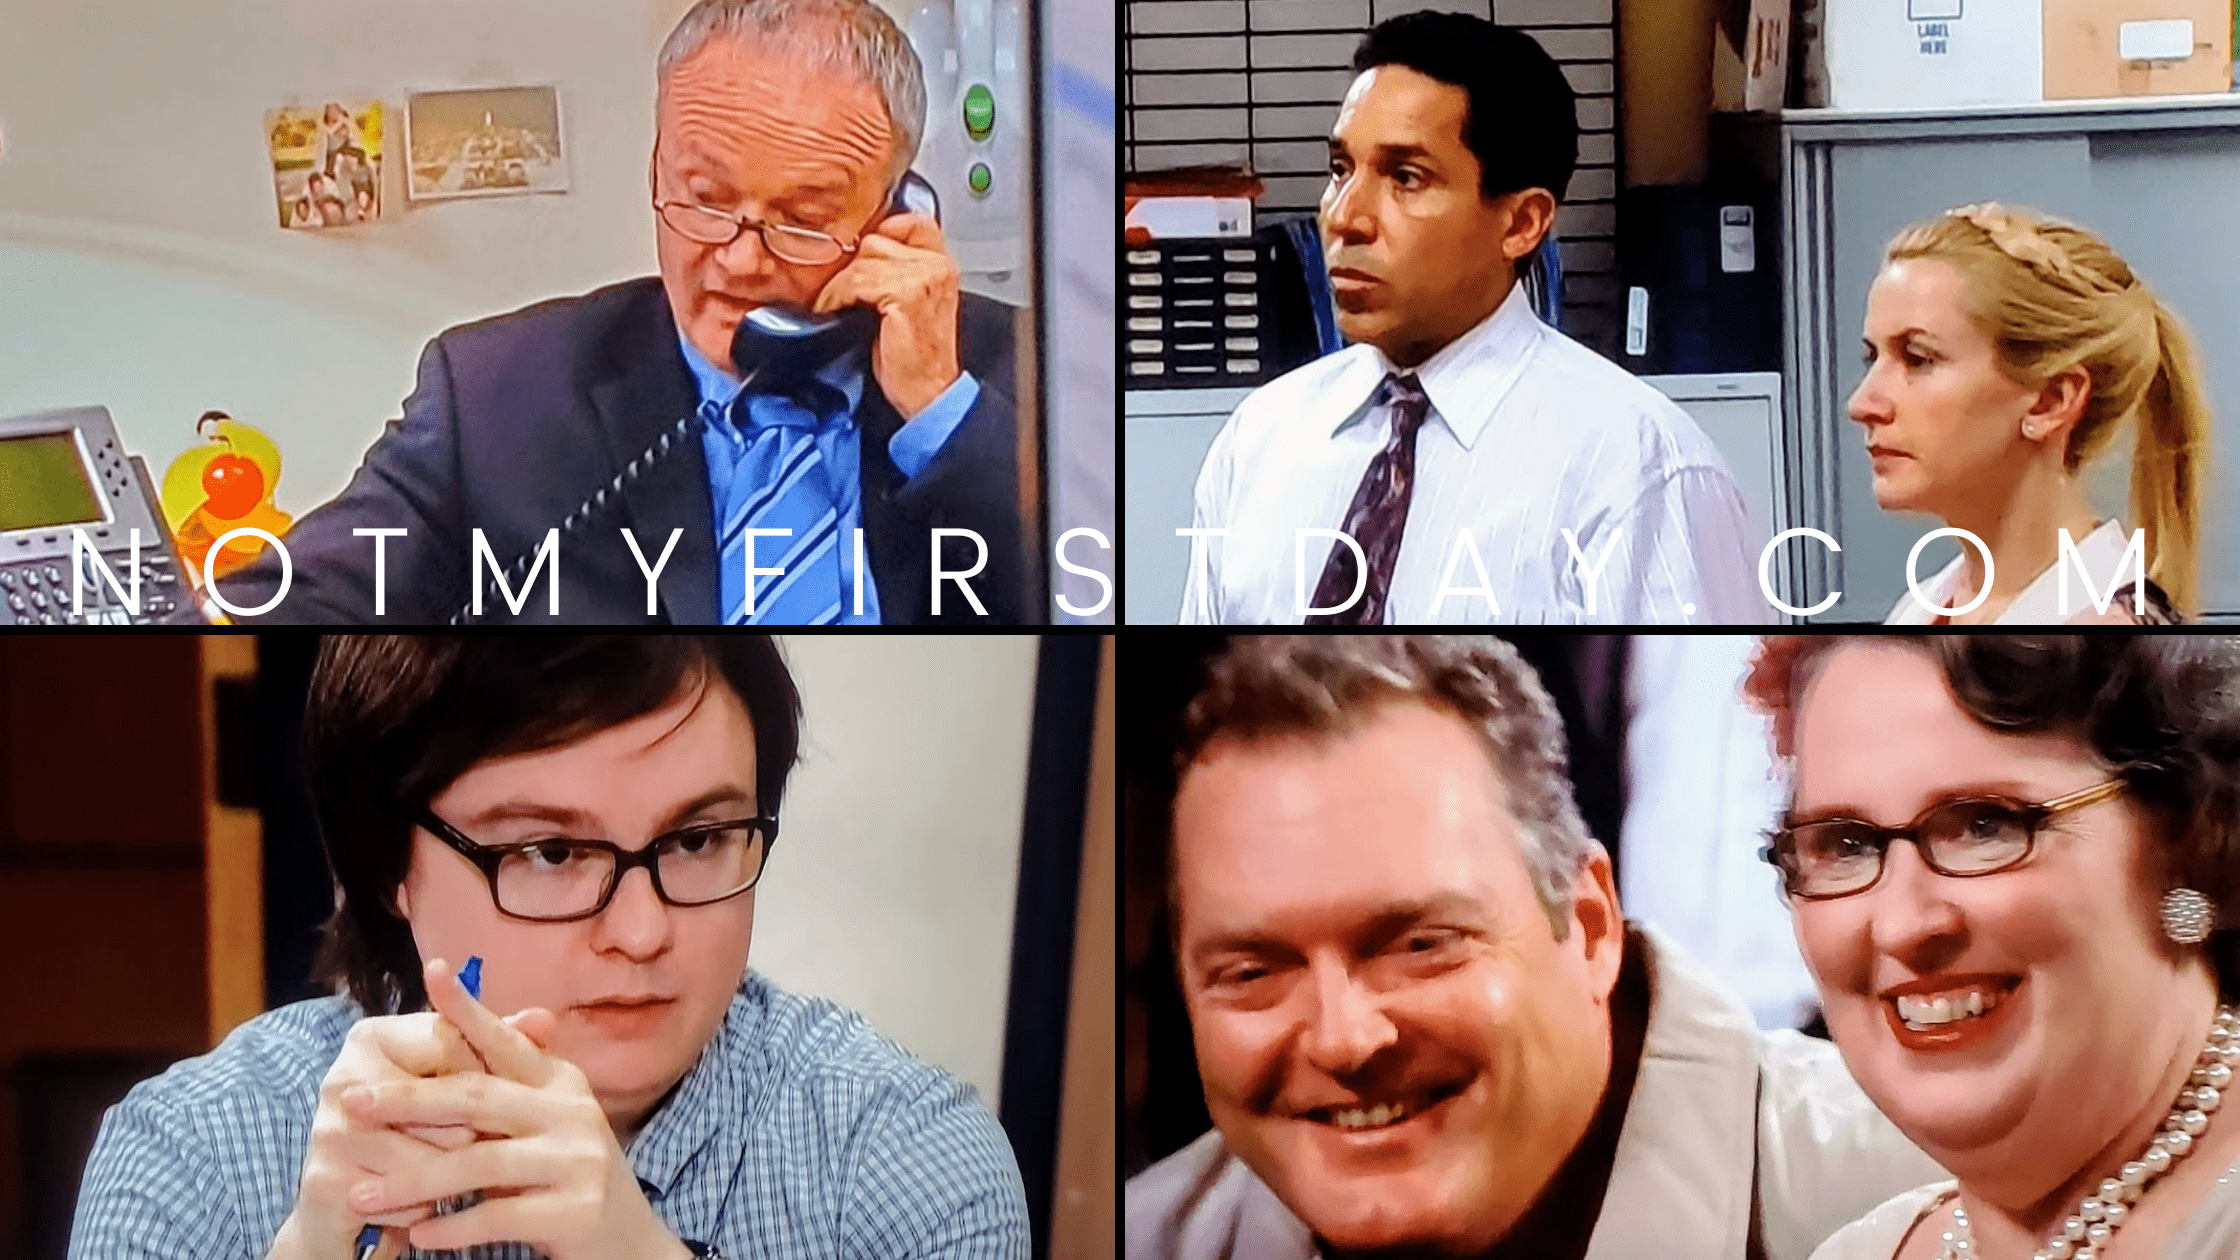 Real Names on The Office | Cast Members We Love